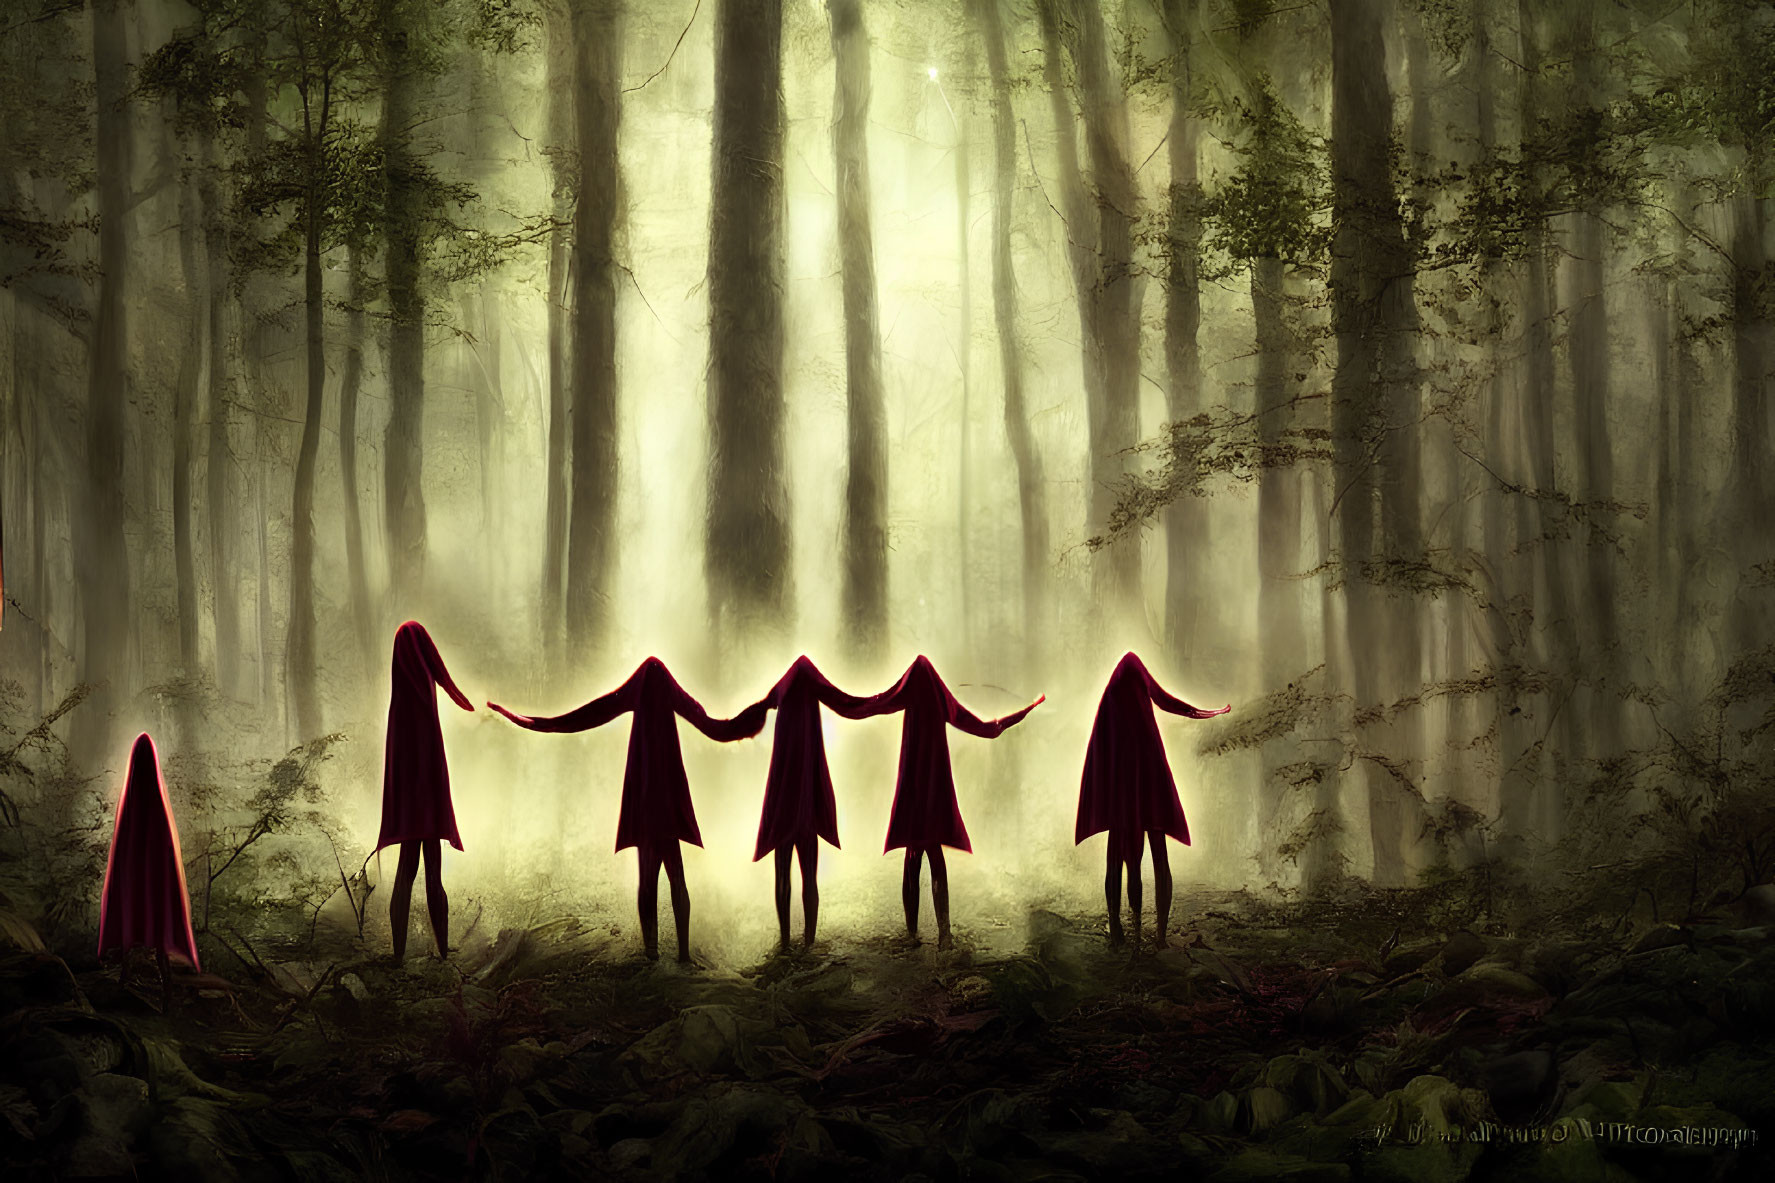 Mystical red-cloaked figures in foggy forest with sunlight